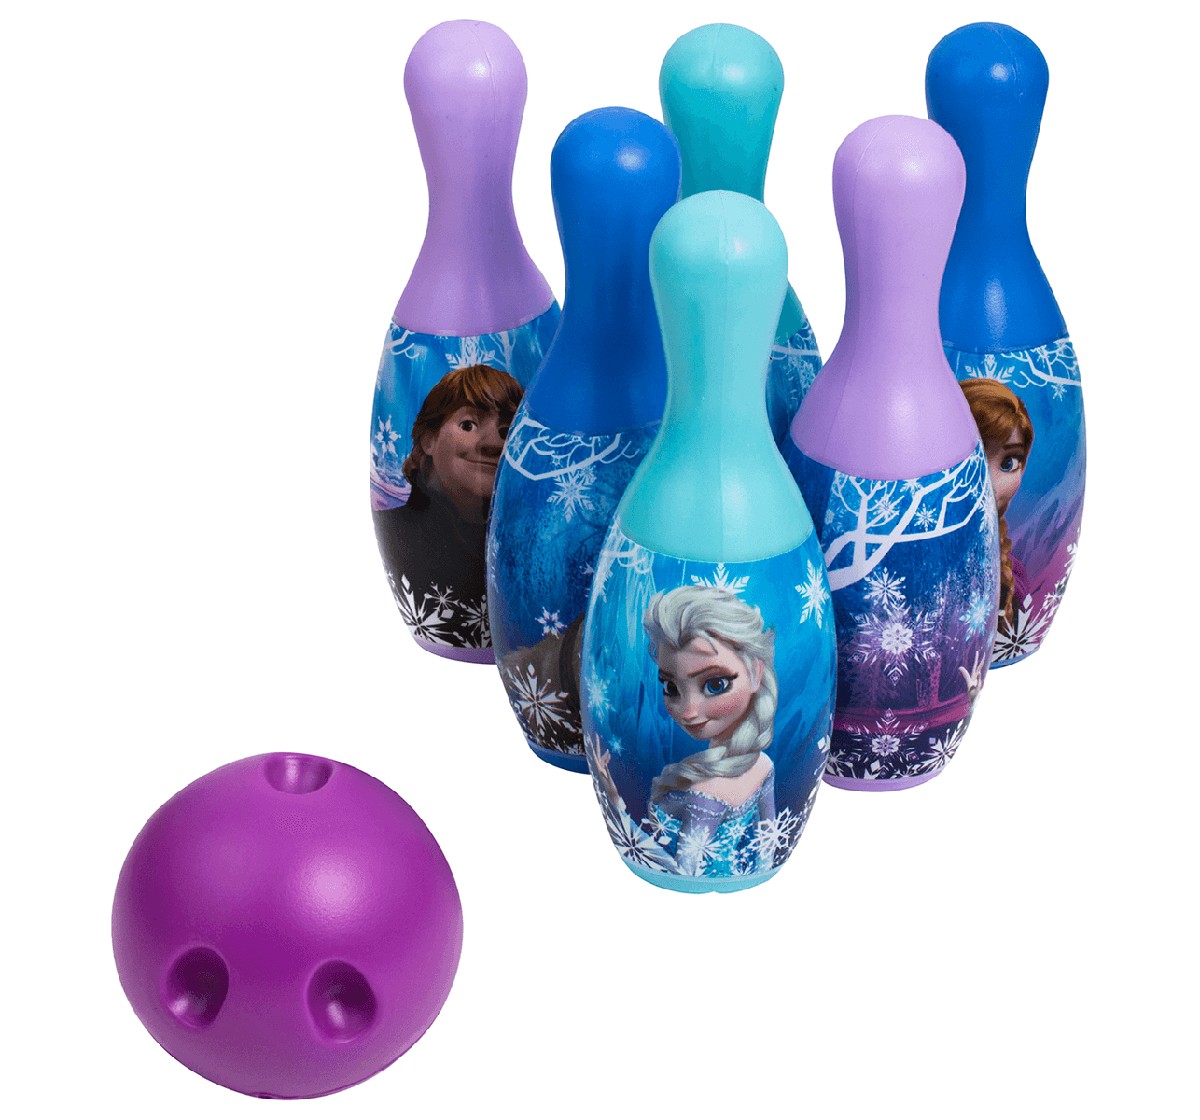 IToys Disney Frozen Bowling Set for Kids age 3Y+ 